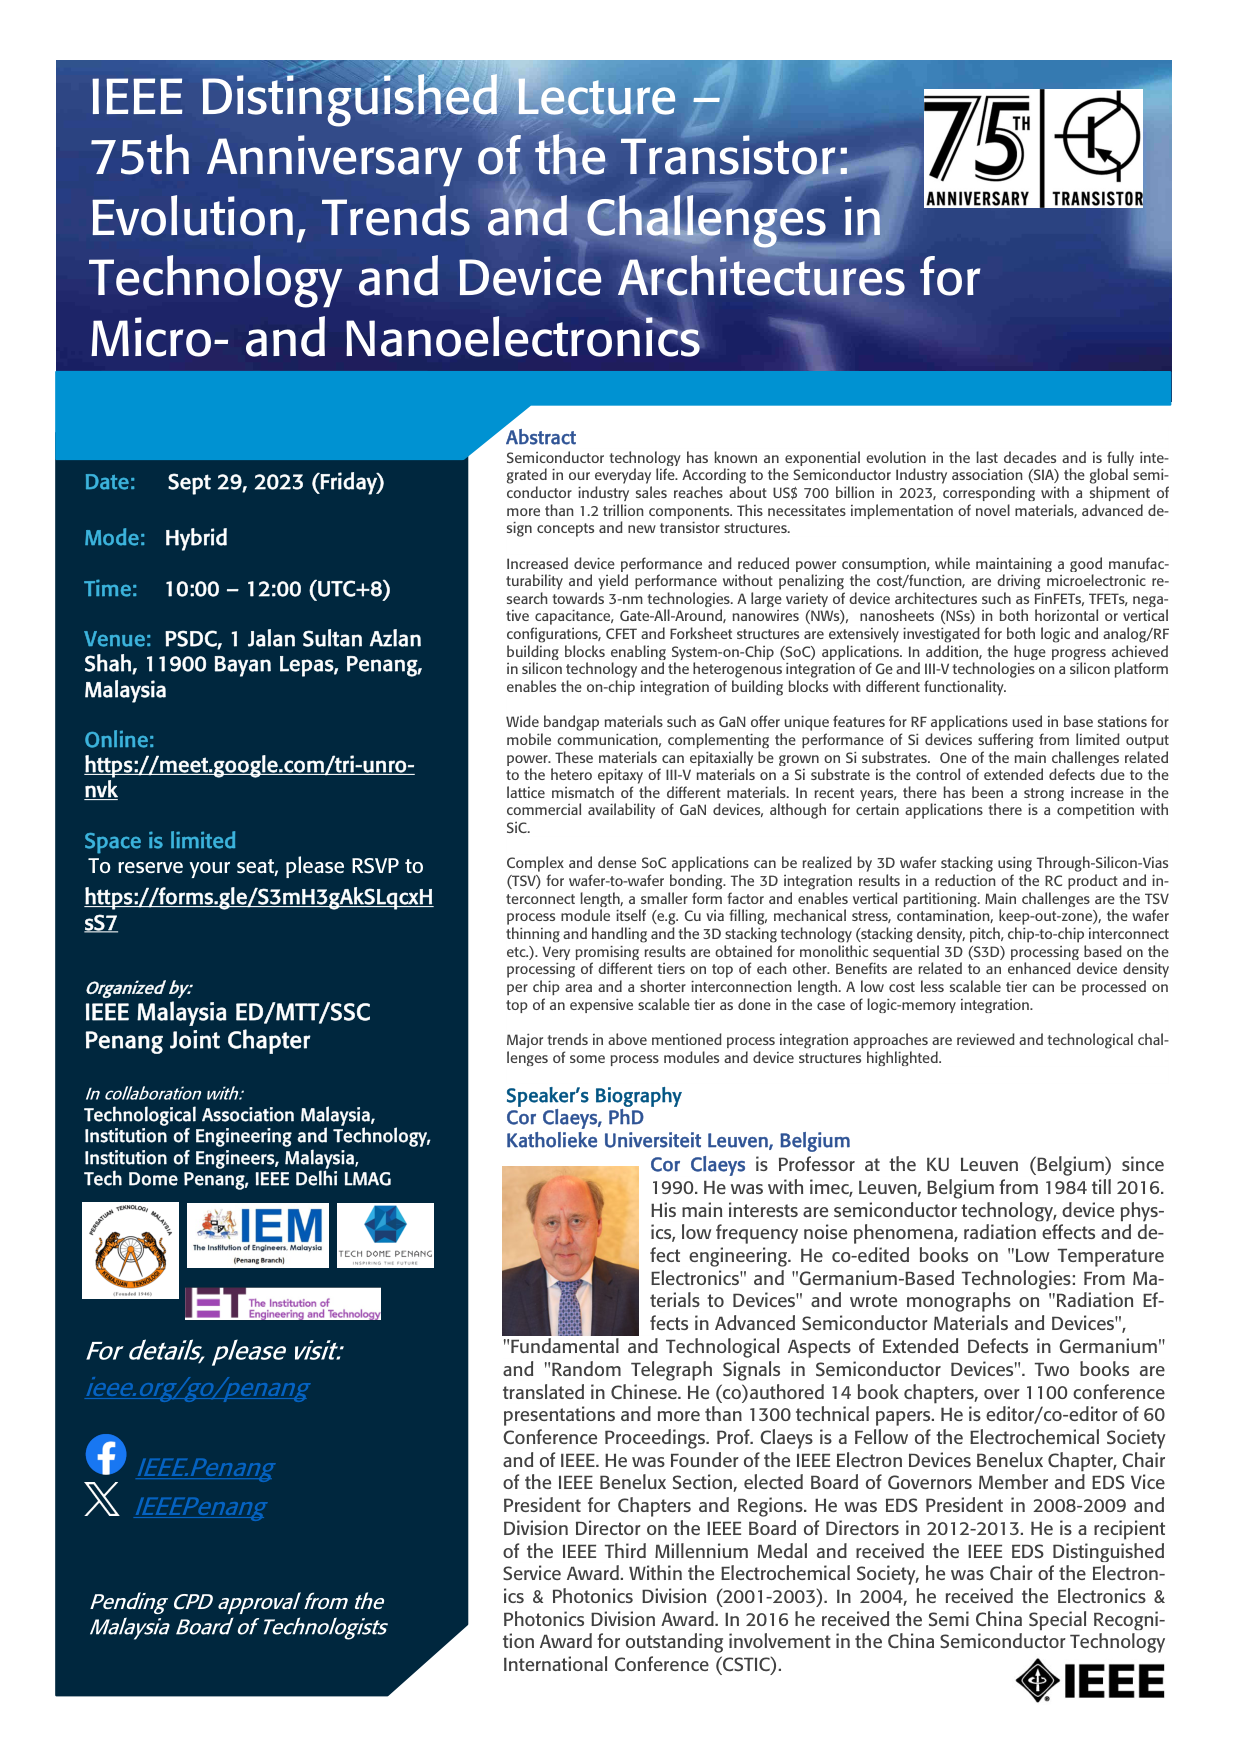 75th Anniversary of the Transistor: Evolution, Trends and Challenges in Technology and Device Architectures for Micro- and Nanoelectronics